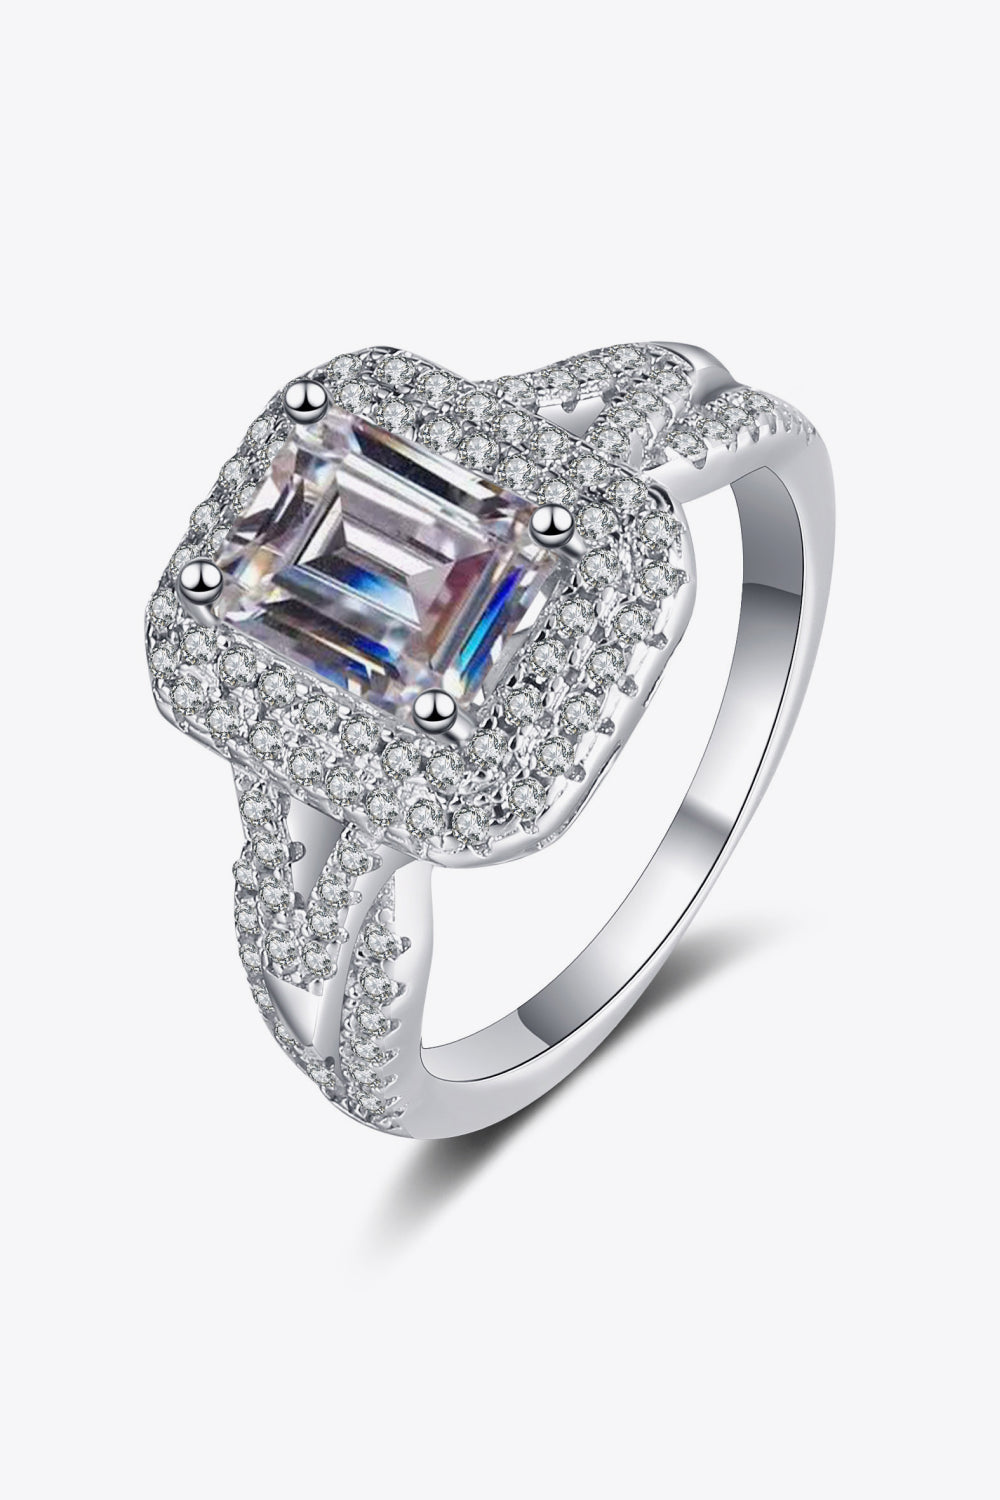 Can't Stop Your Shine 2 Carat Moissanite Ring - Rings - FITGGINS